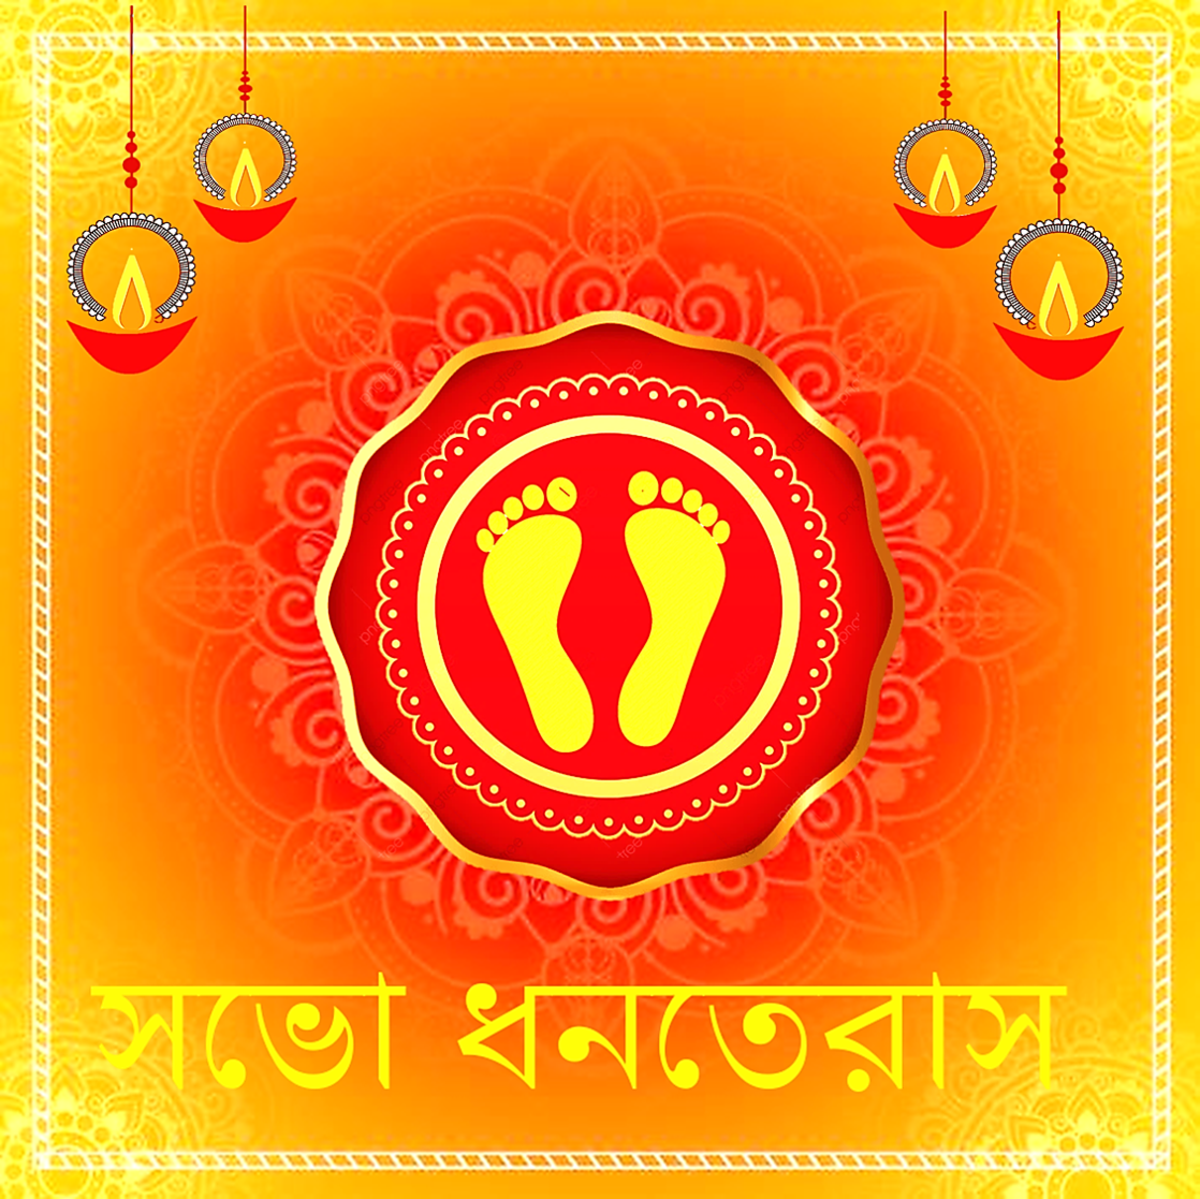 Dhanteras Wishes in Bengali